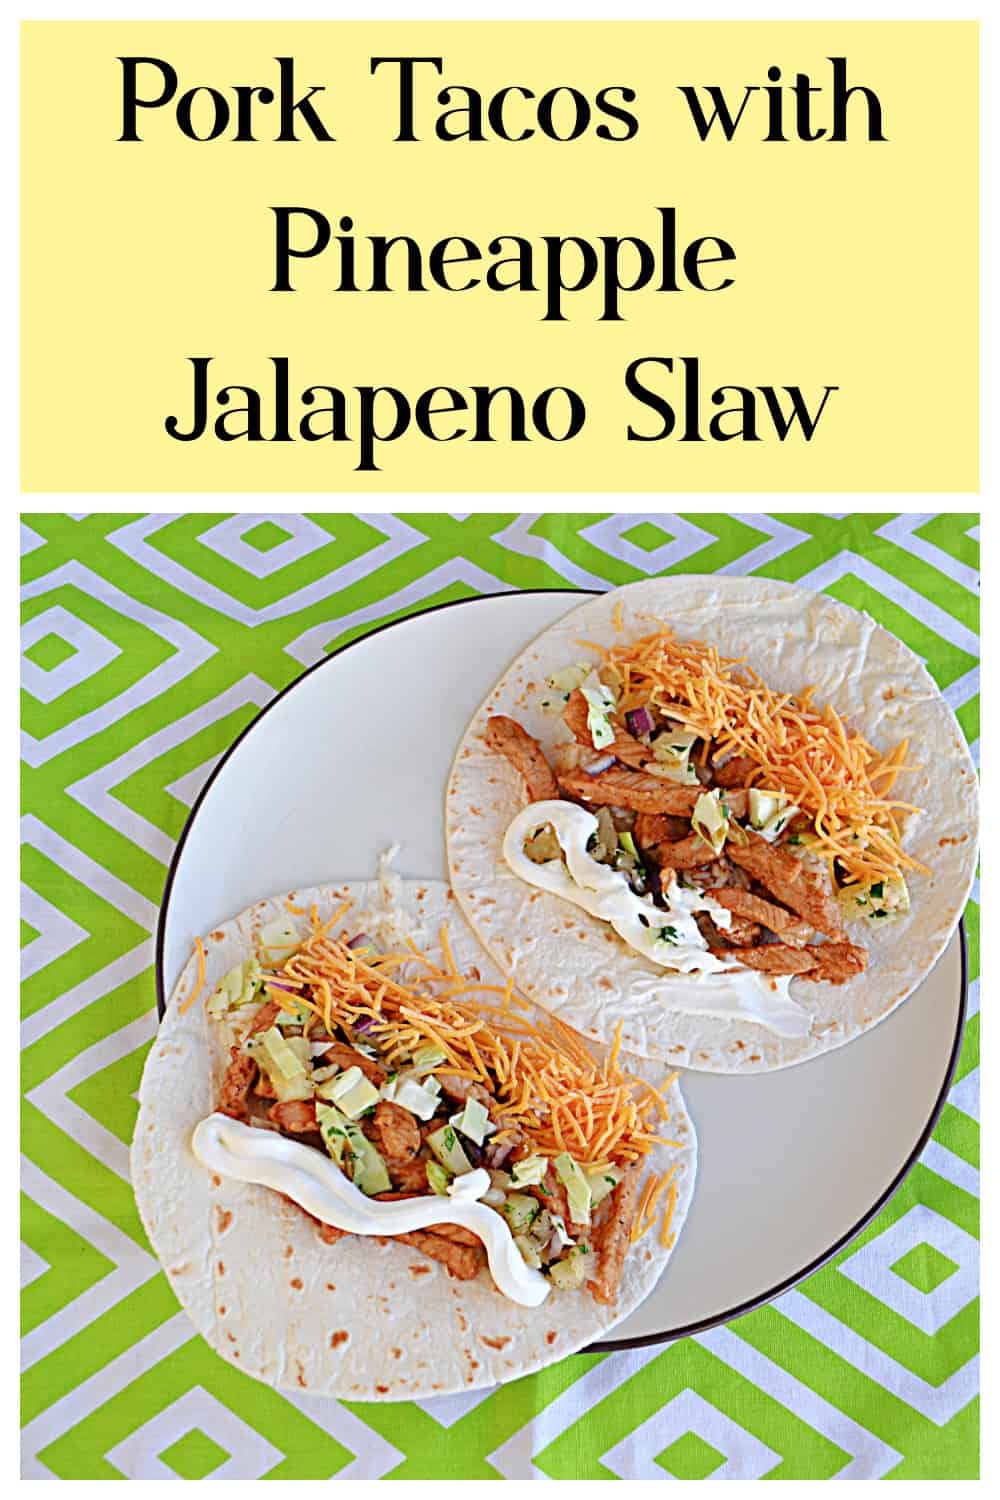 Pin Image: Text title, plate of pork tacos with cheese, sour cream, and slaw.